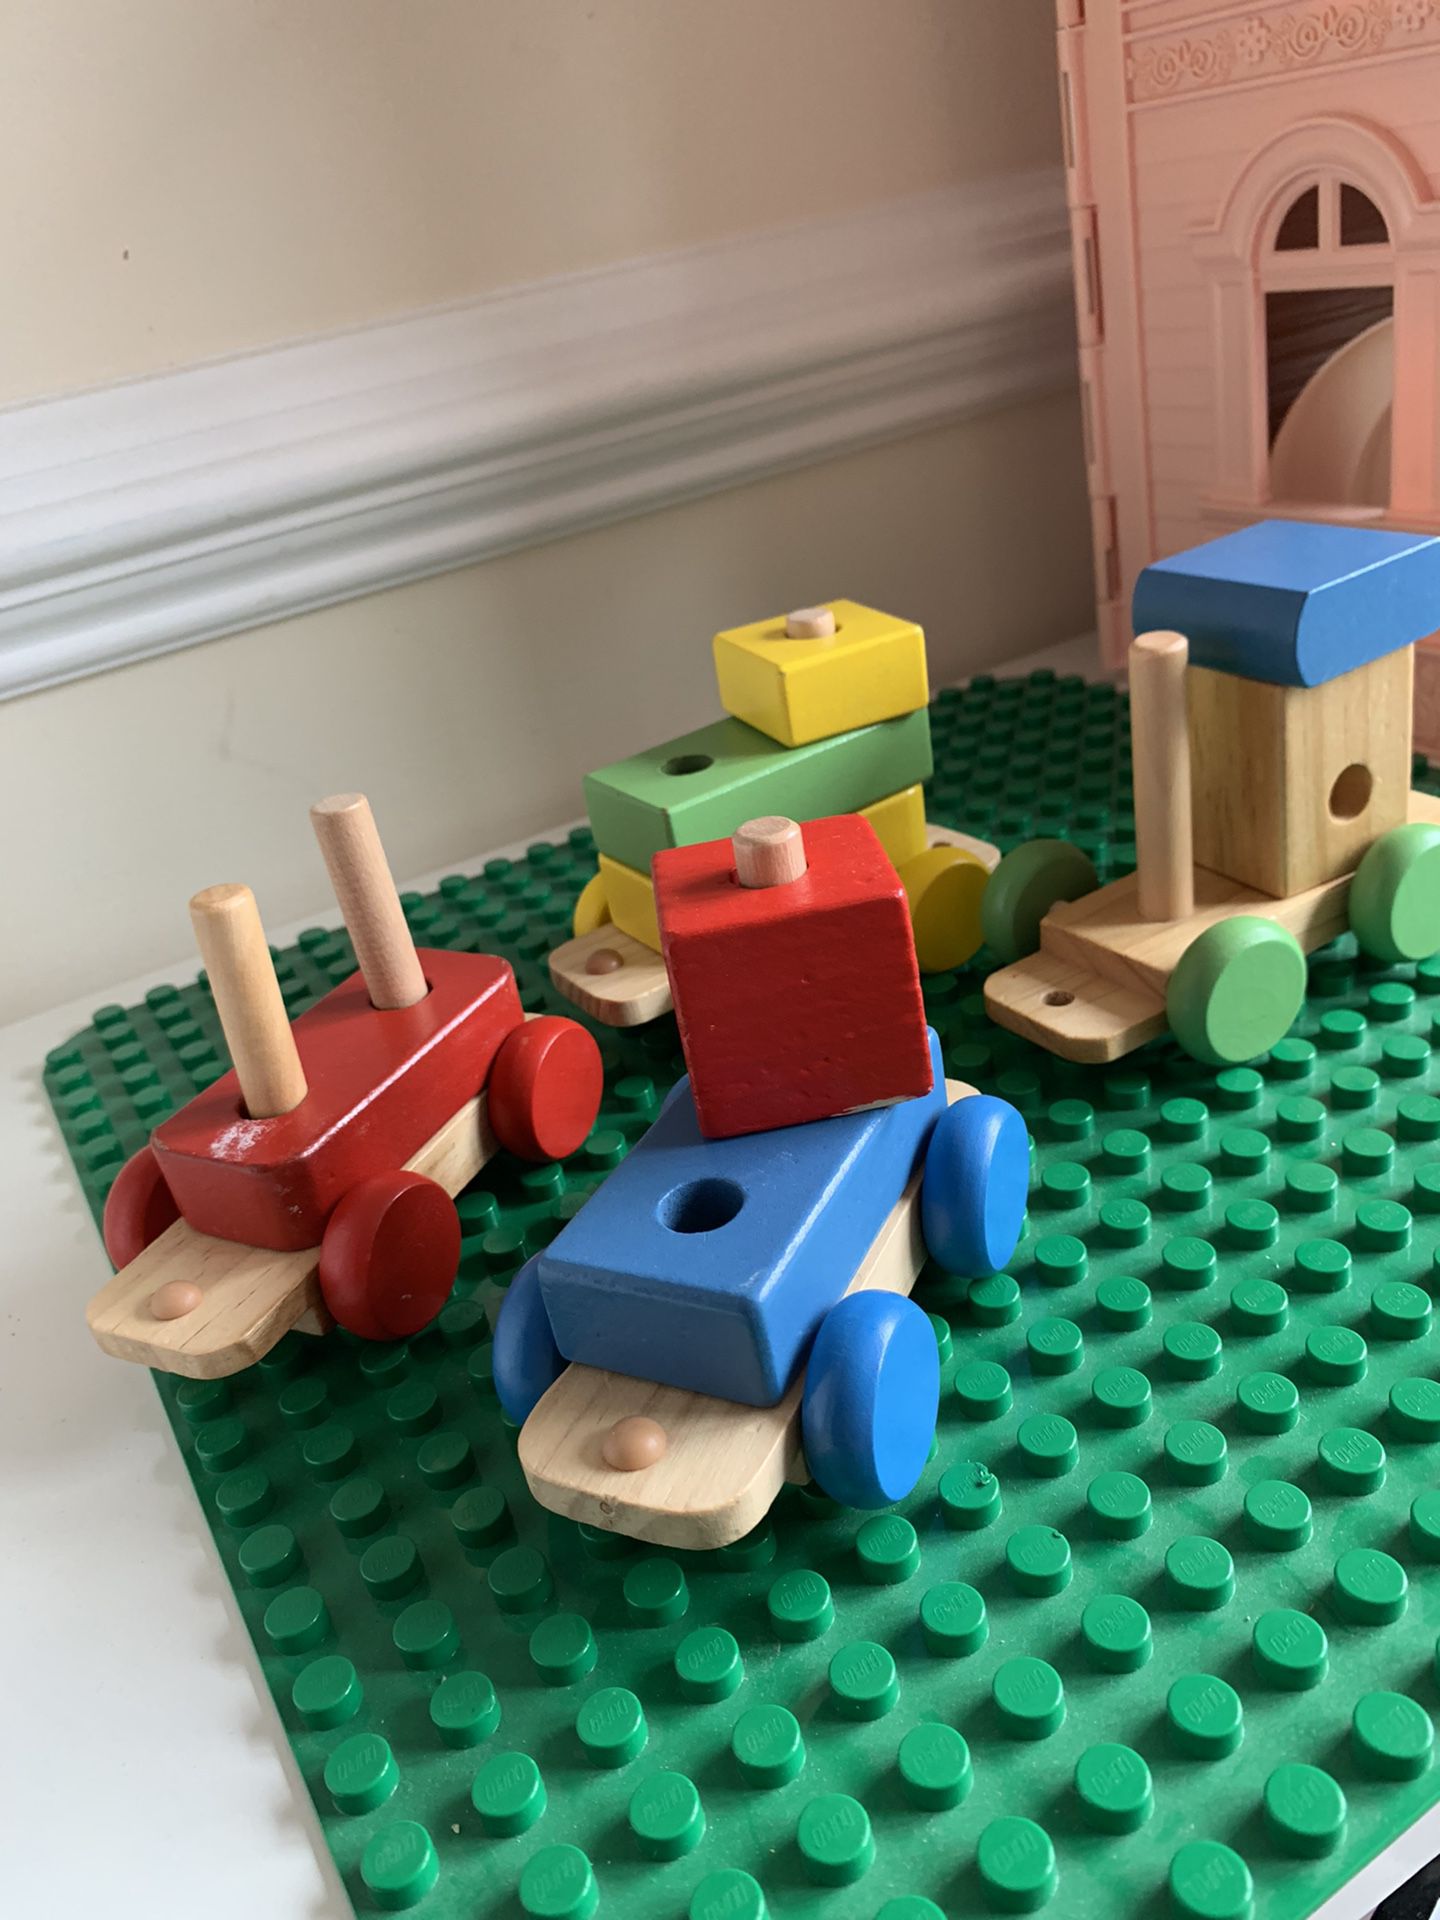 Wooden play toys